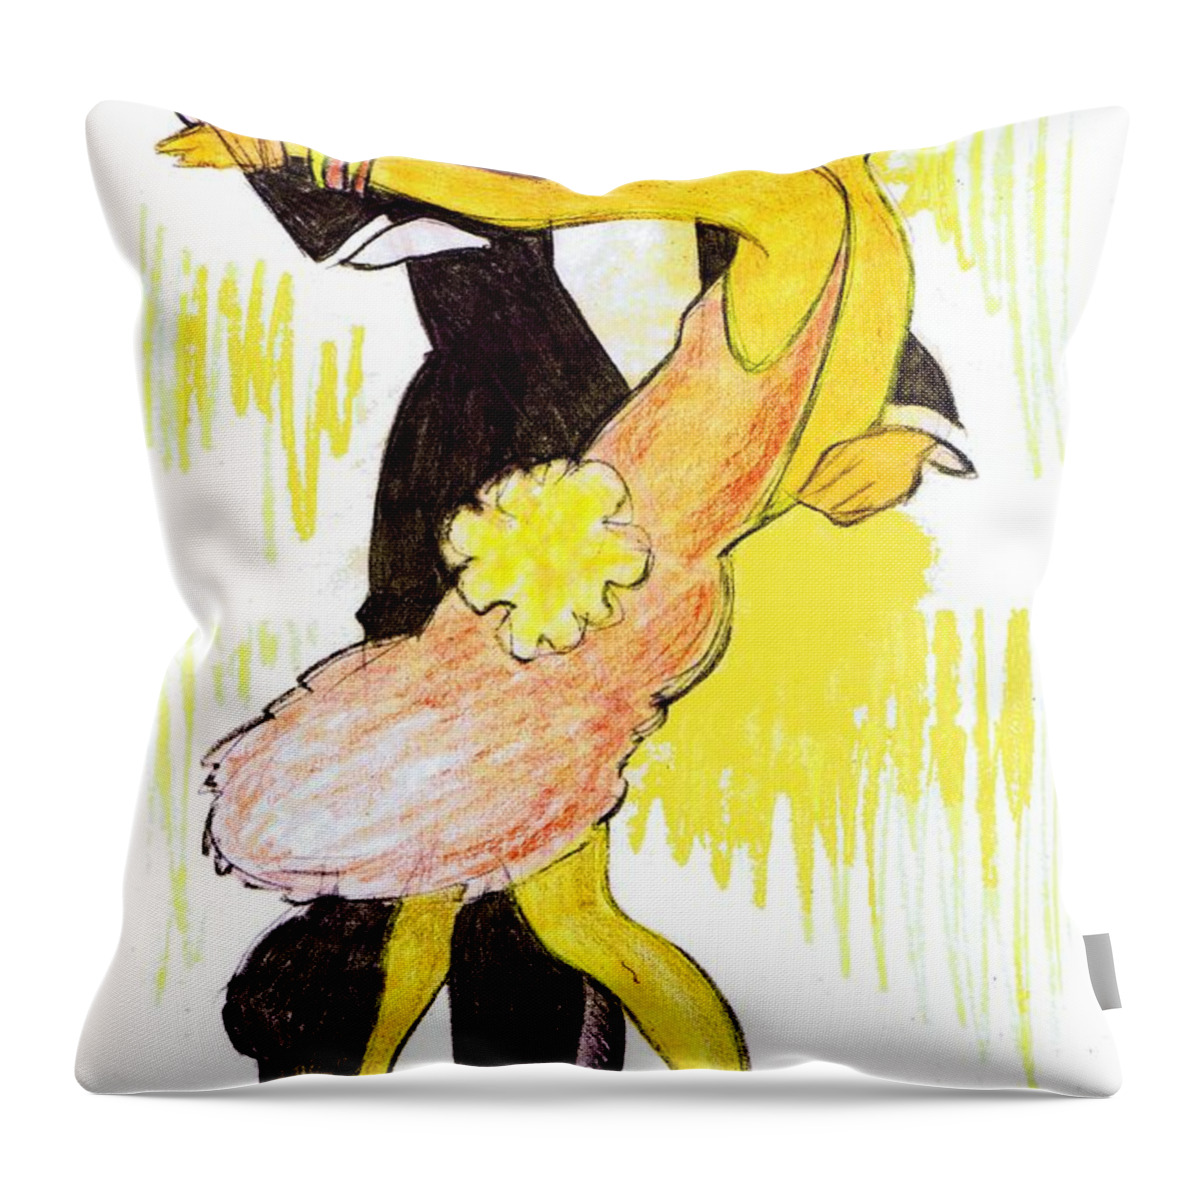 Nostalgia Throw Pillow featuring the drawing Deco Dancers by Mel Thompson